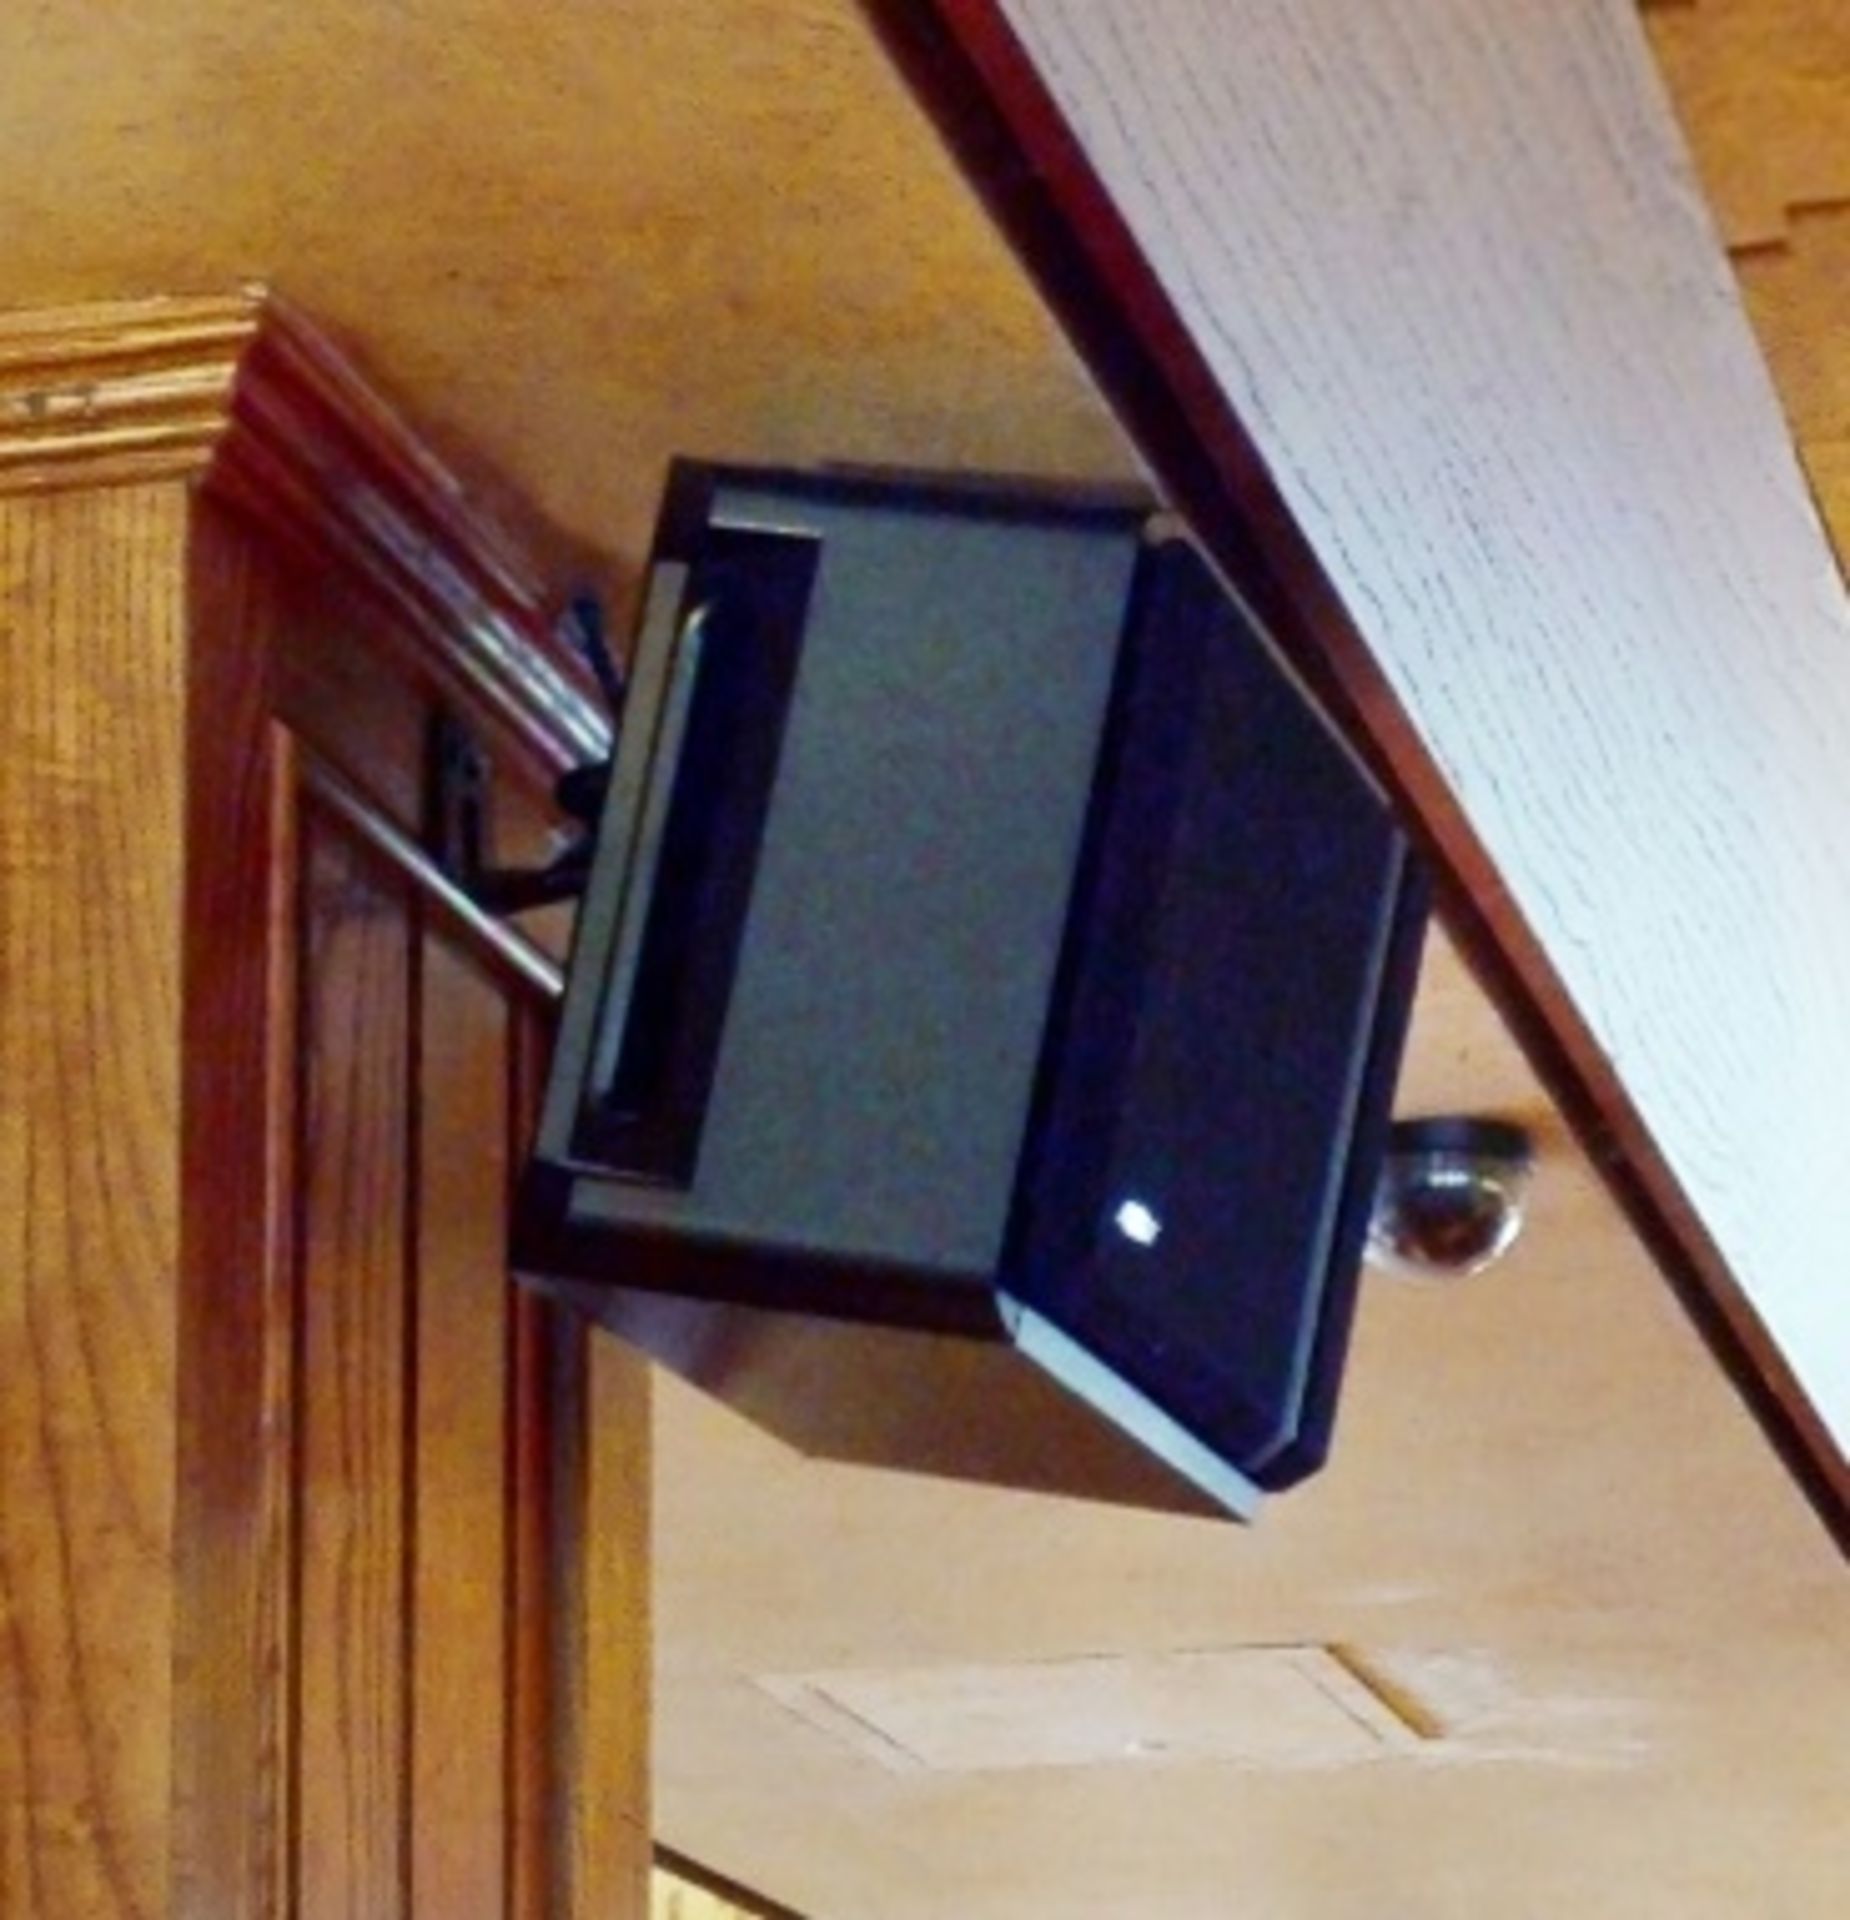 1 x Restaurant Audio System Including 1 x QSC RMX850 Amplifier, 12 x Bose Speaker System & More! - Image 8 of 17